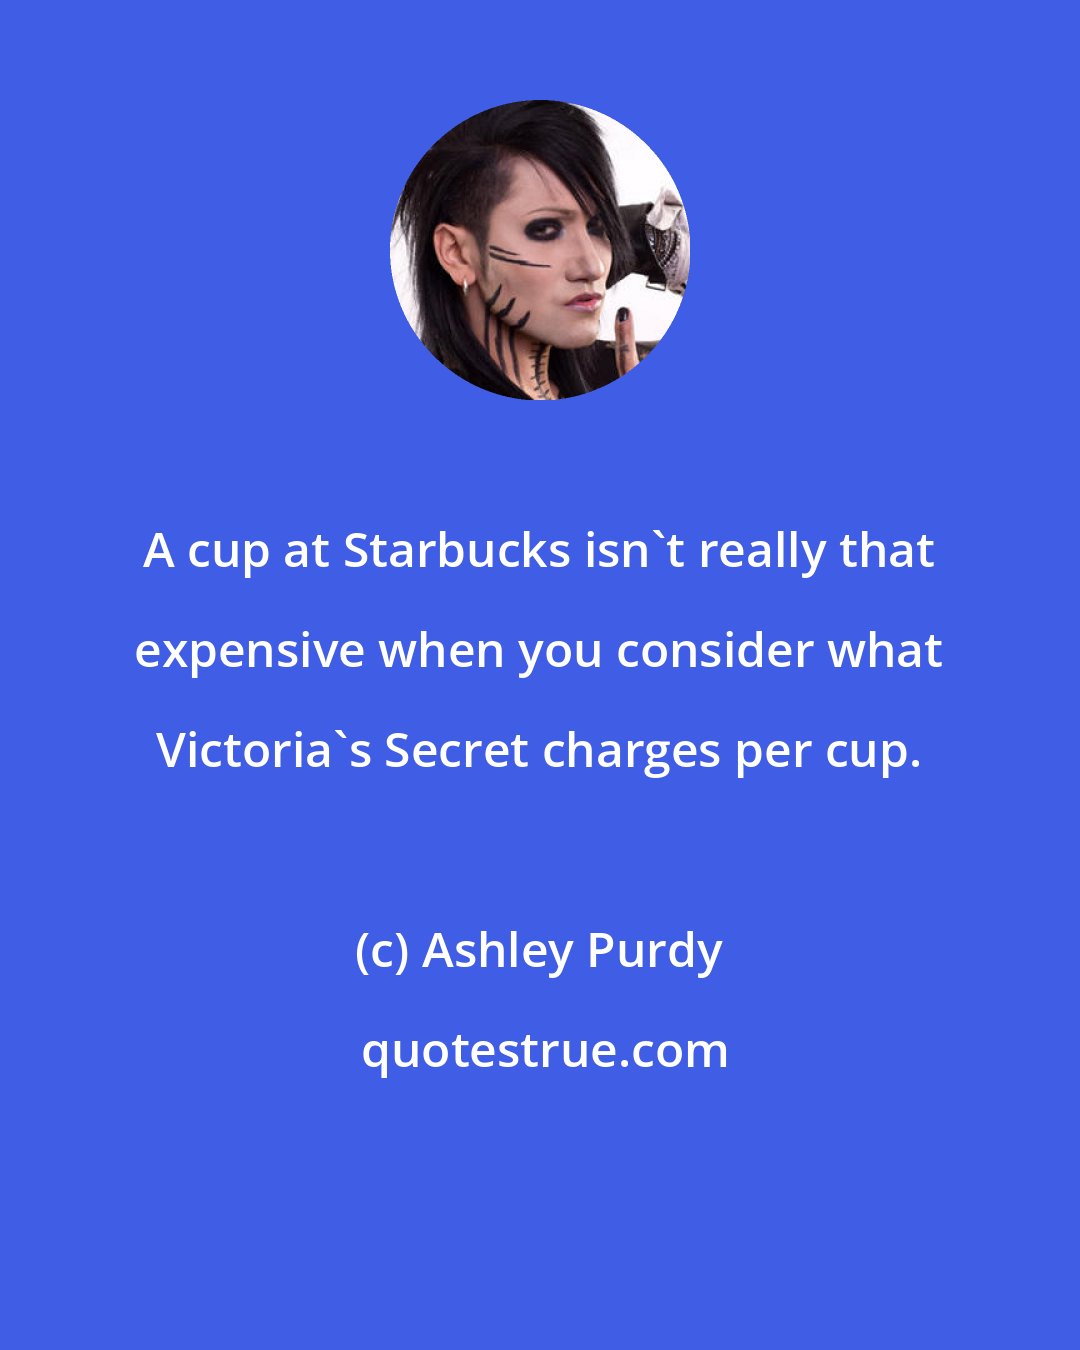 Ashley Purdy: A cup at Starbucks isn't really that expensive when you consider what Victoria's Secret charges per cup.